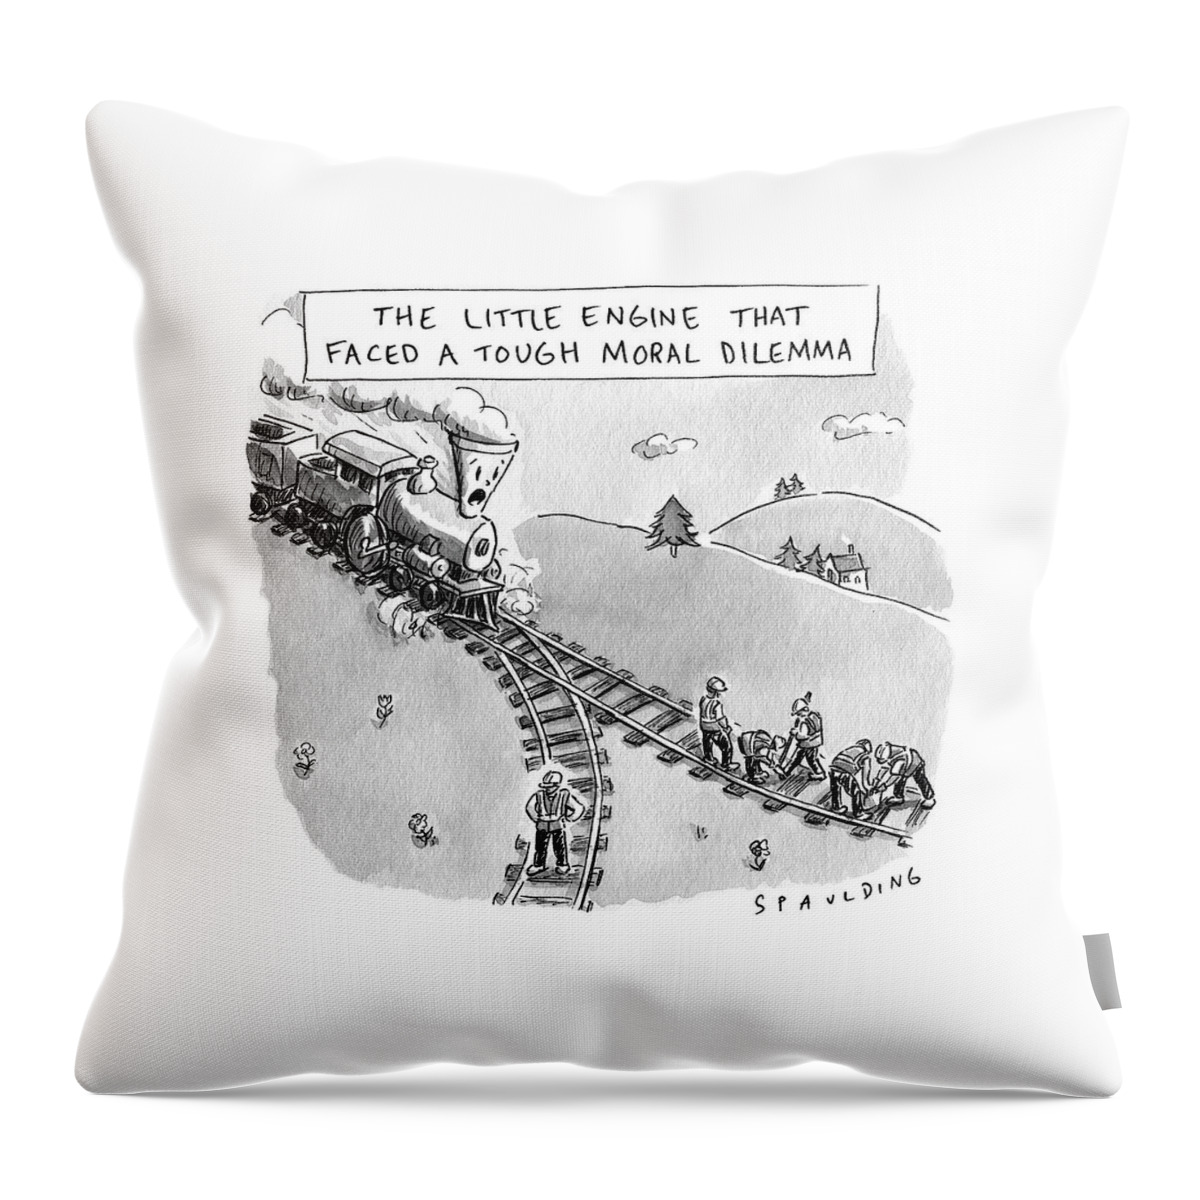 The Little Engine That Faced A Tough Moral Dilemma Throw Pillow